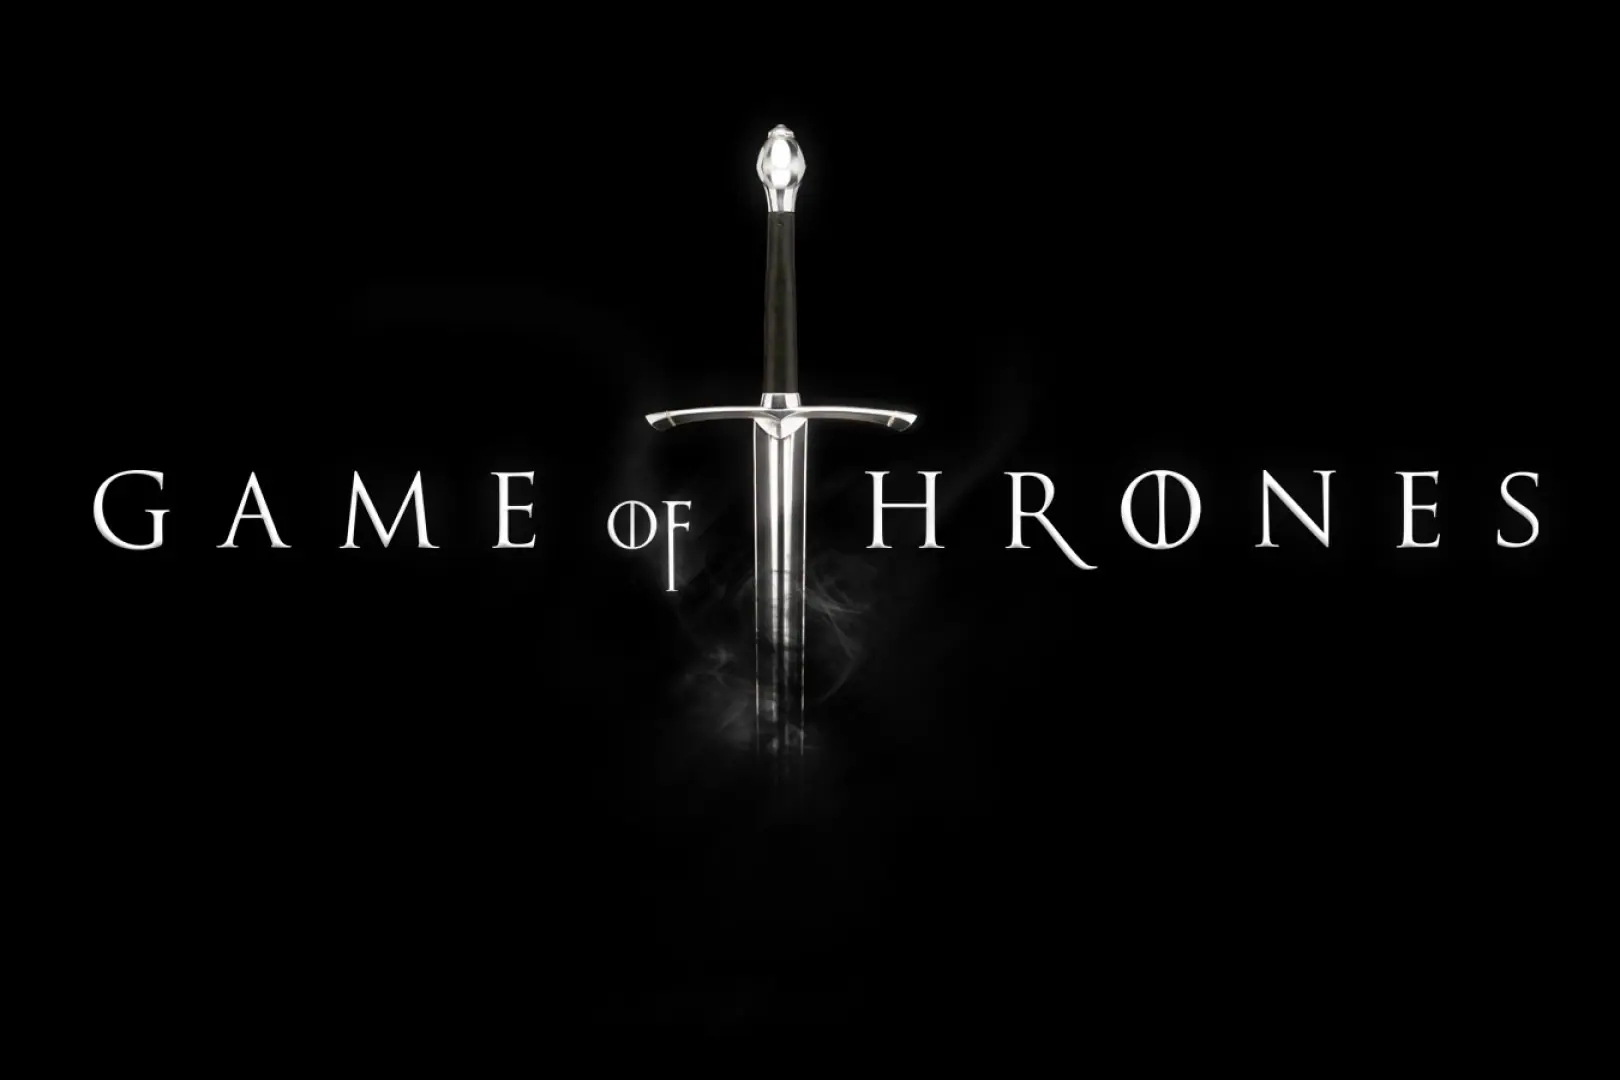 Game of thrones - Bande-Annonce ! 1